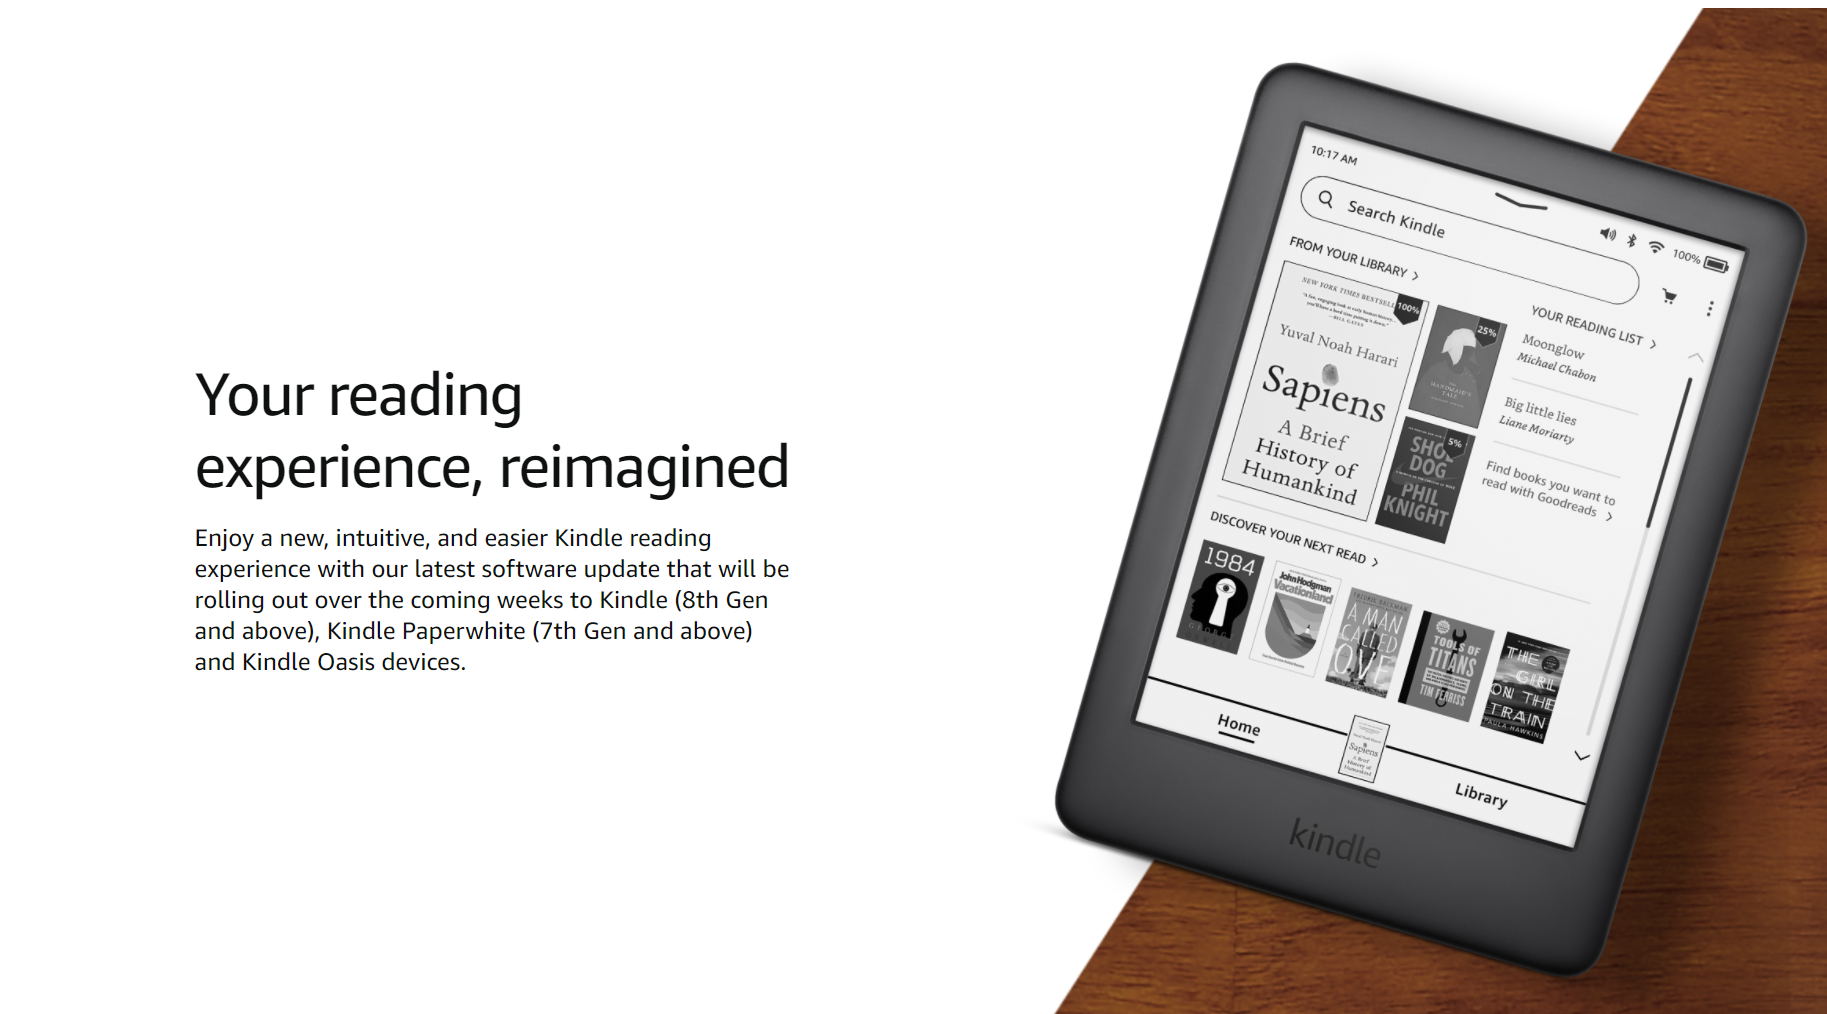 Amazon is updating Kindles to construct them more straightforward to navigate